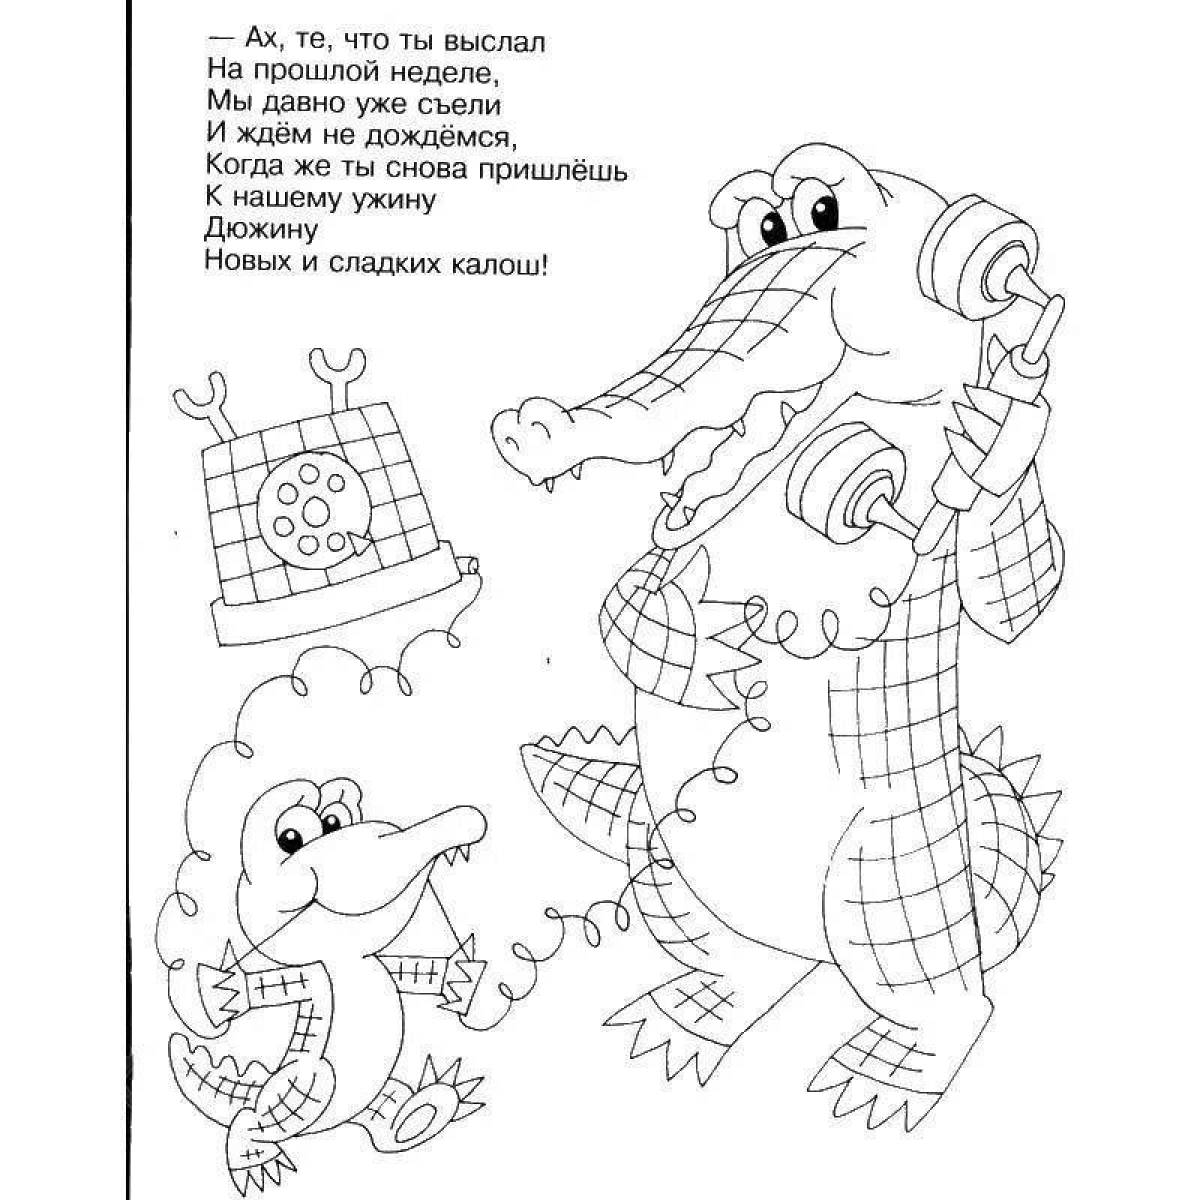 Color-lively chukovsky coloring page